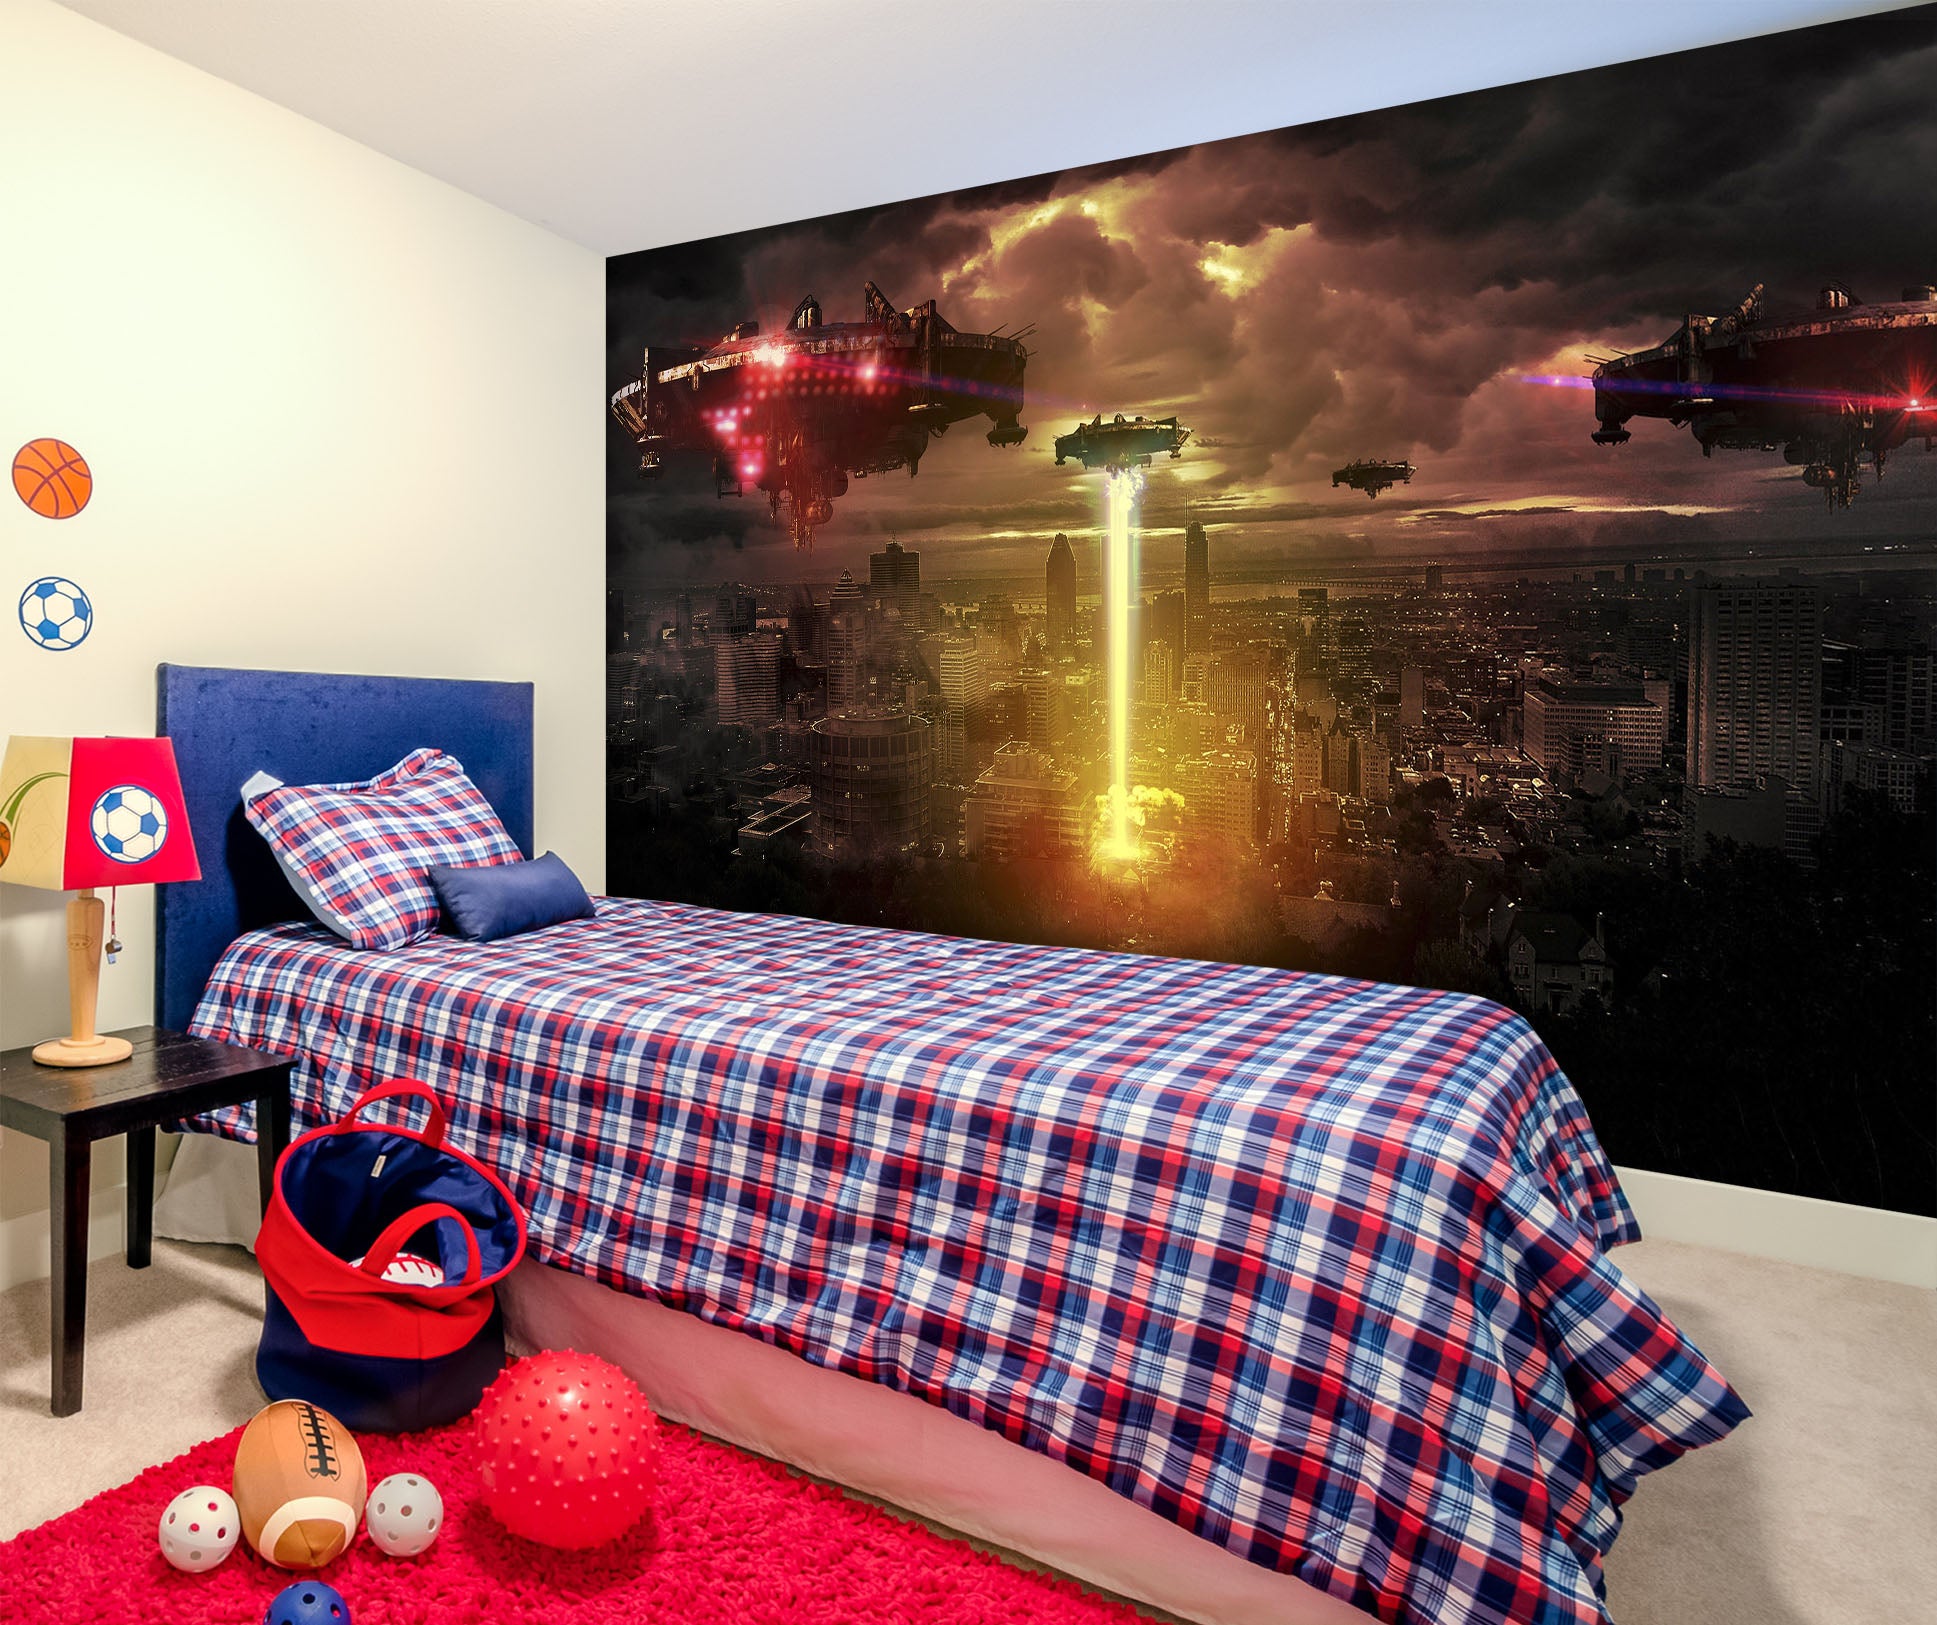 3D Space Station 411 Vehicle Wall Murals